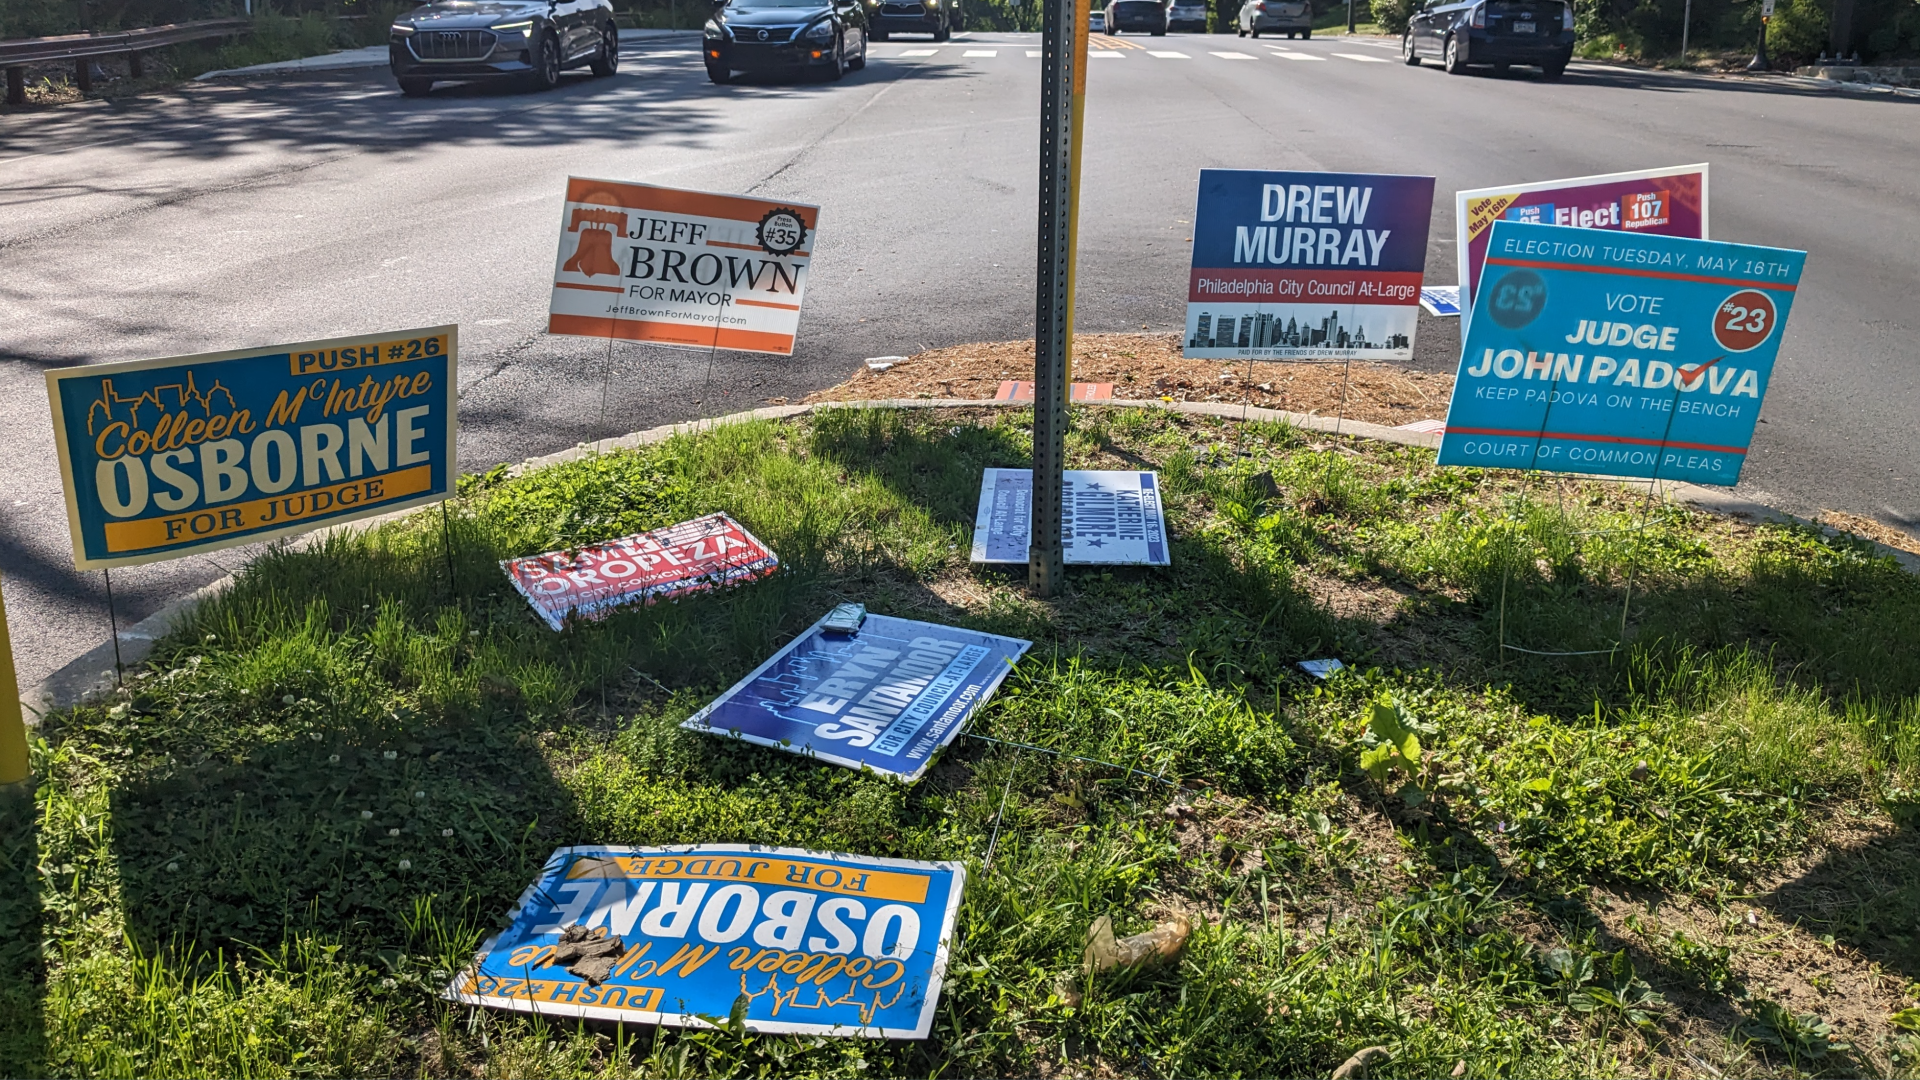 Campaign lawn signs